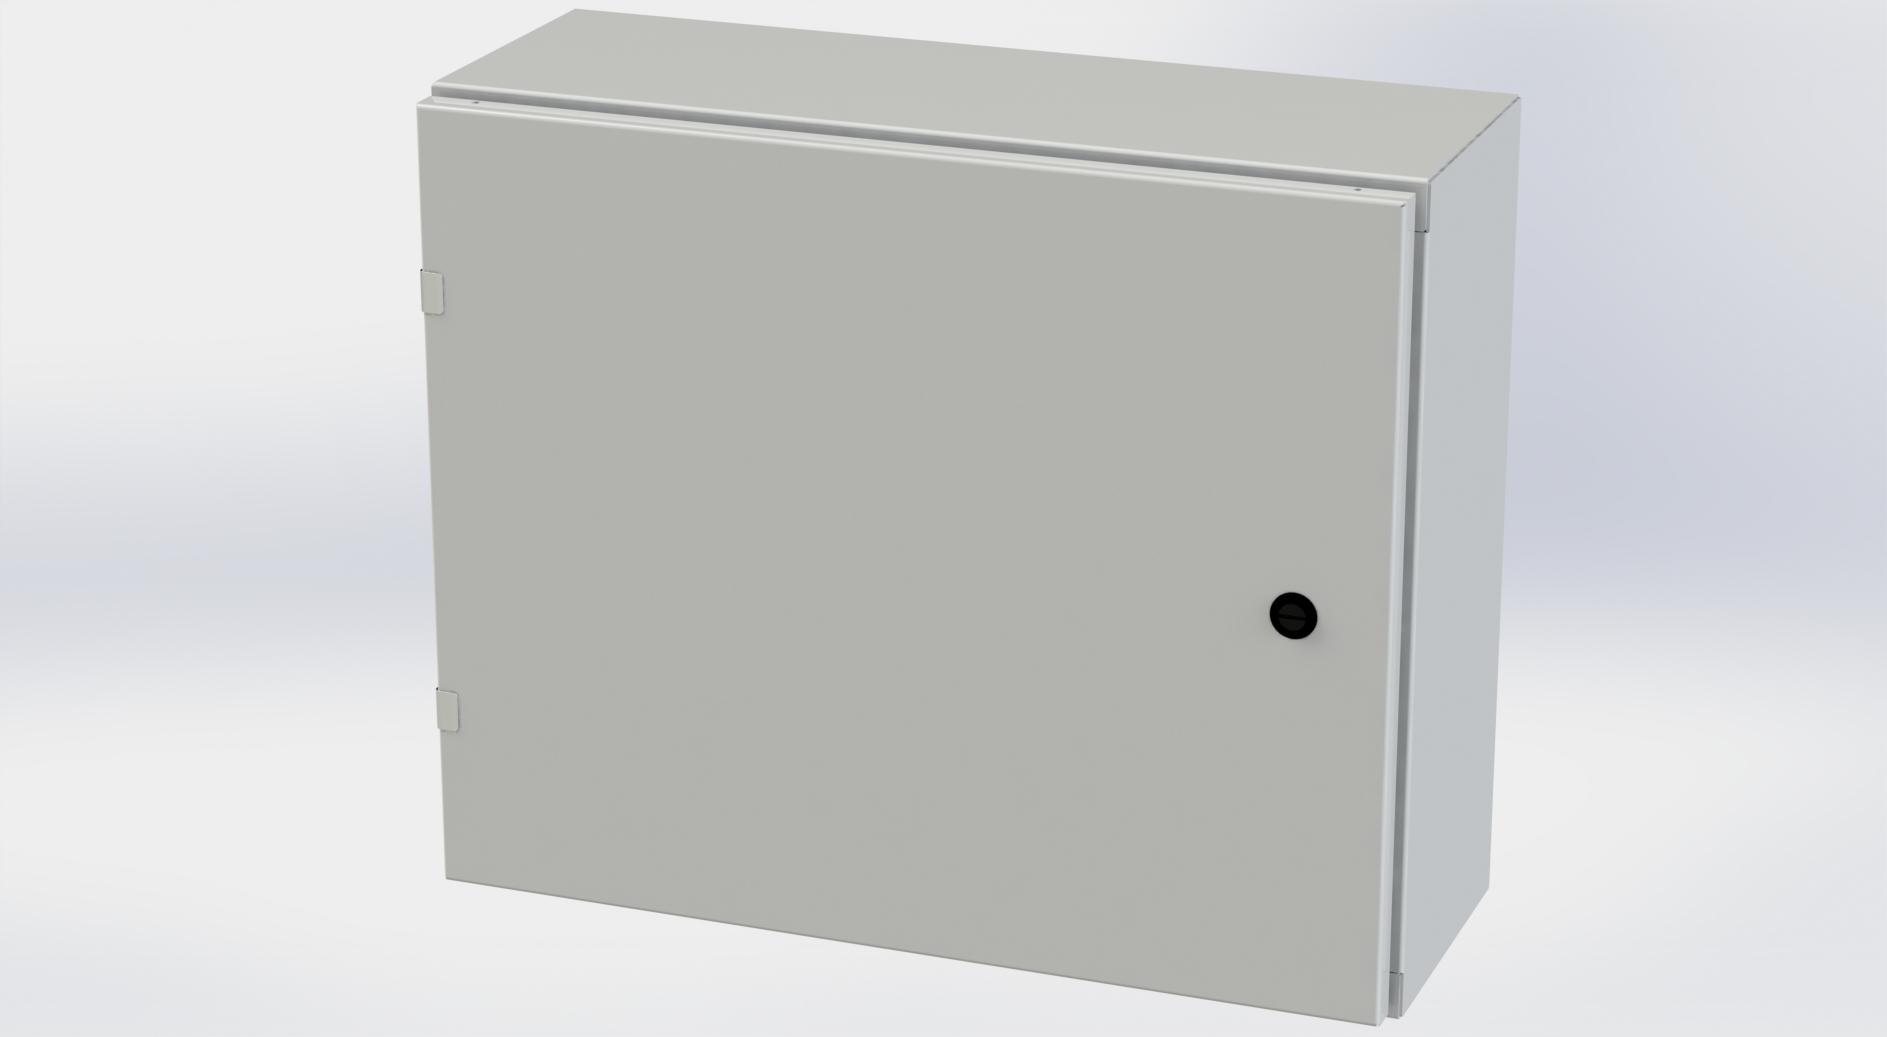 Saginaw Control SCE-20EL2408LPLG EL Enclosure, Height:20.00", Width:24.00", Depth:8.00", RAL 7035 gray powder coating inside and out. Optional sub-panels are powder coated white.